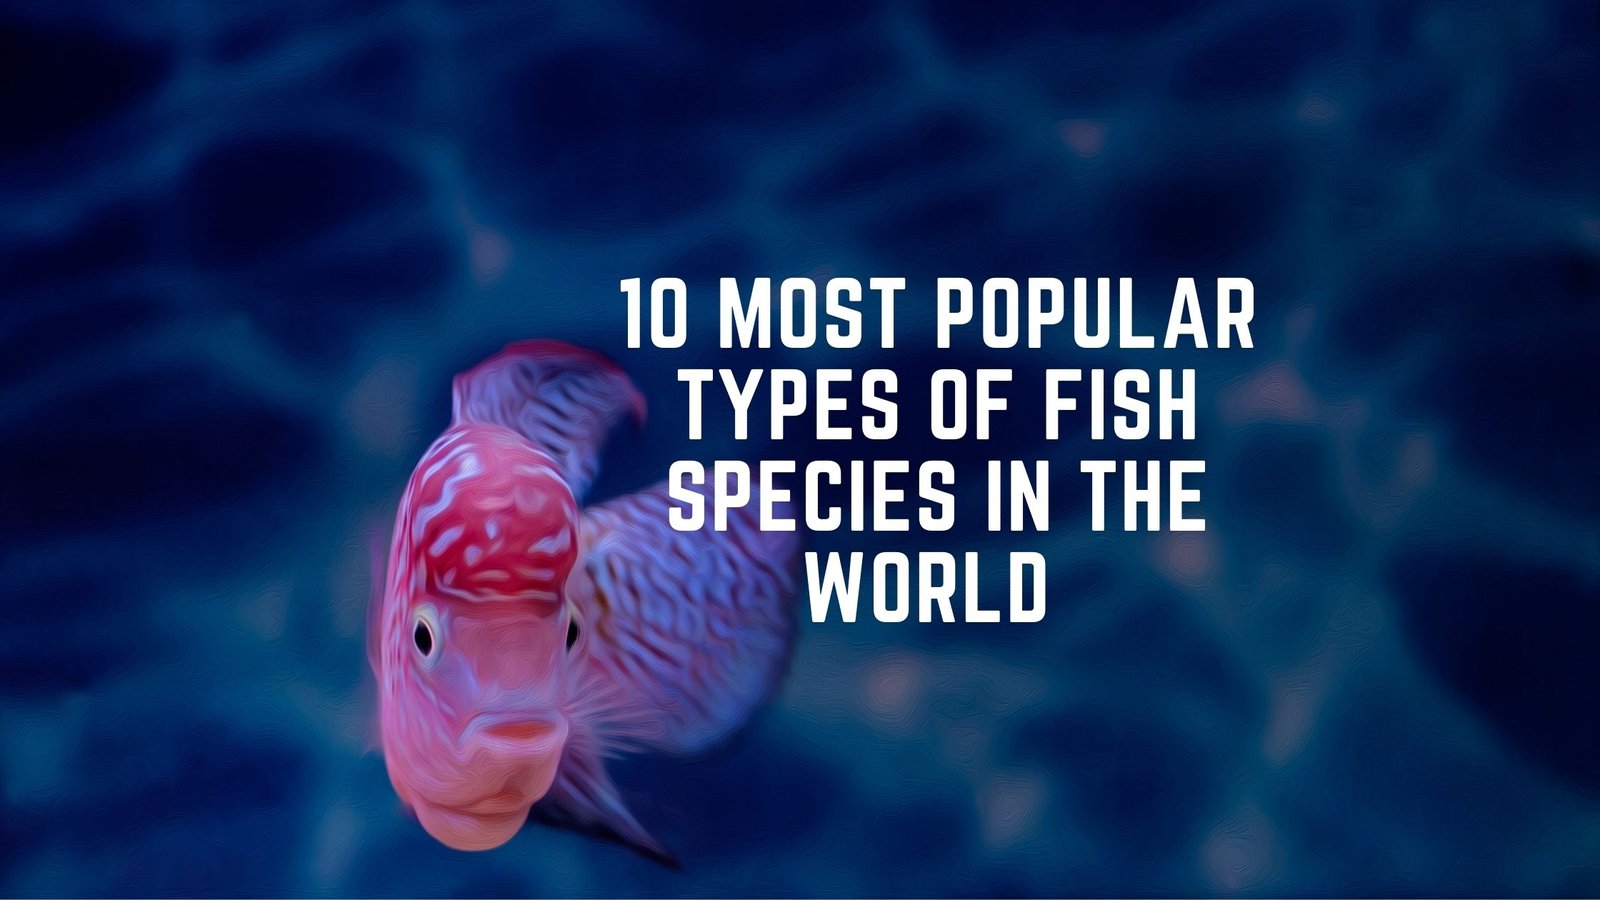 10-most-popular-types-of-fish-species-in-the-world-that-you-should-know-proto-animal